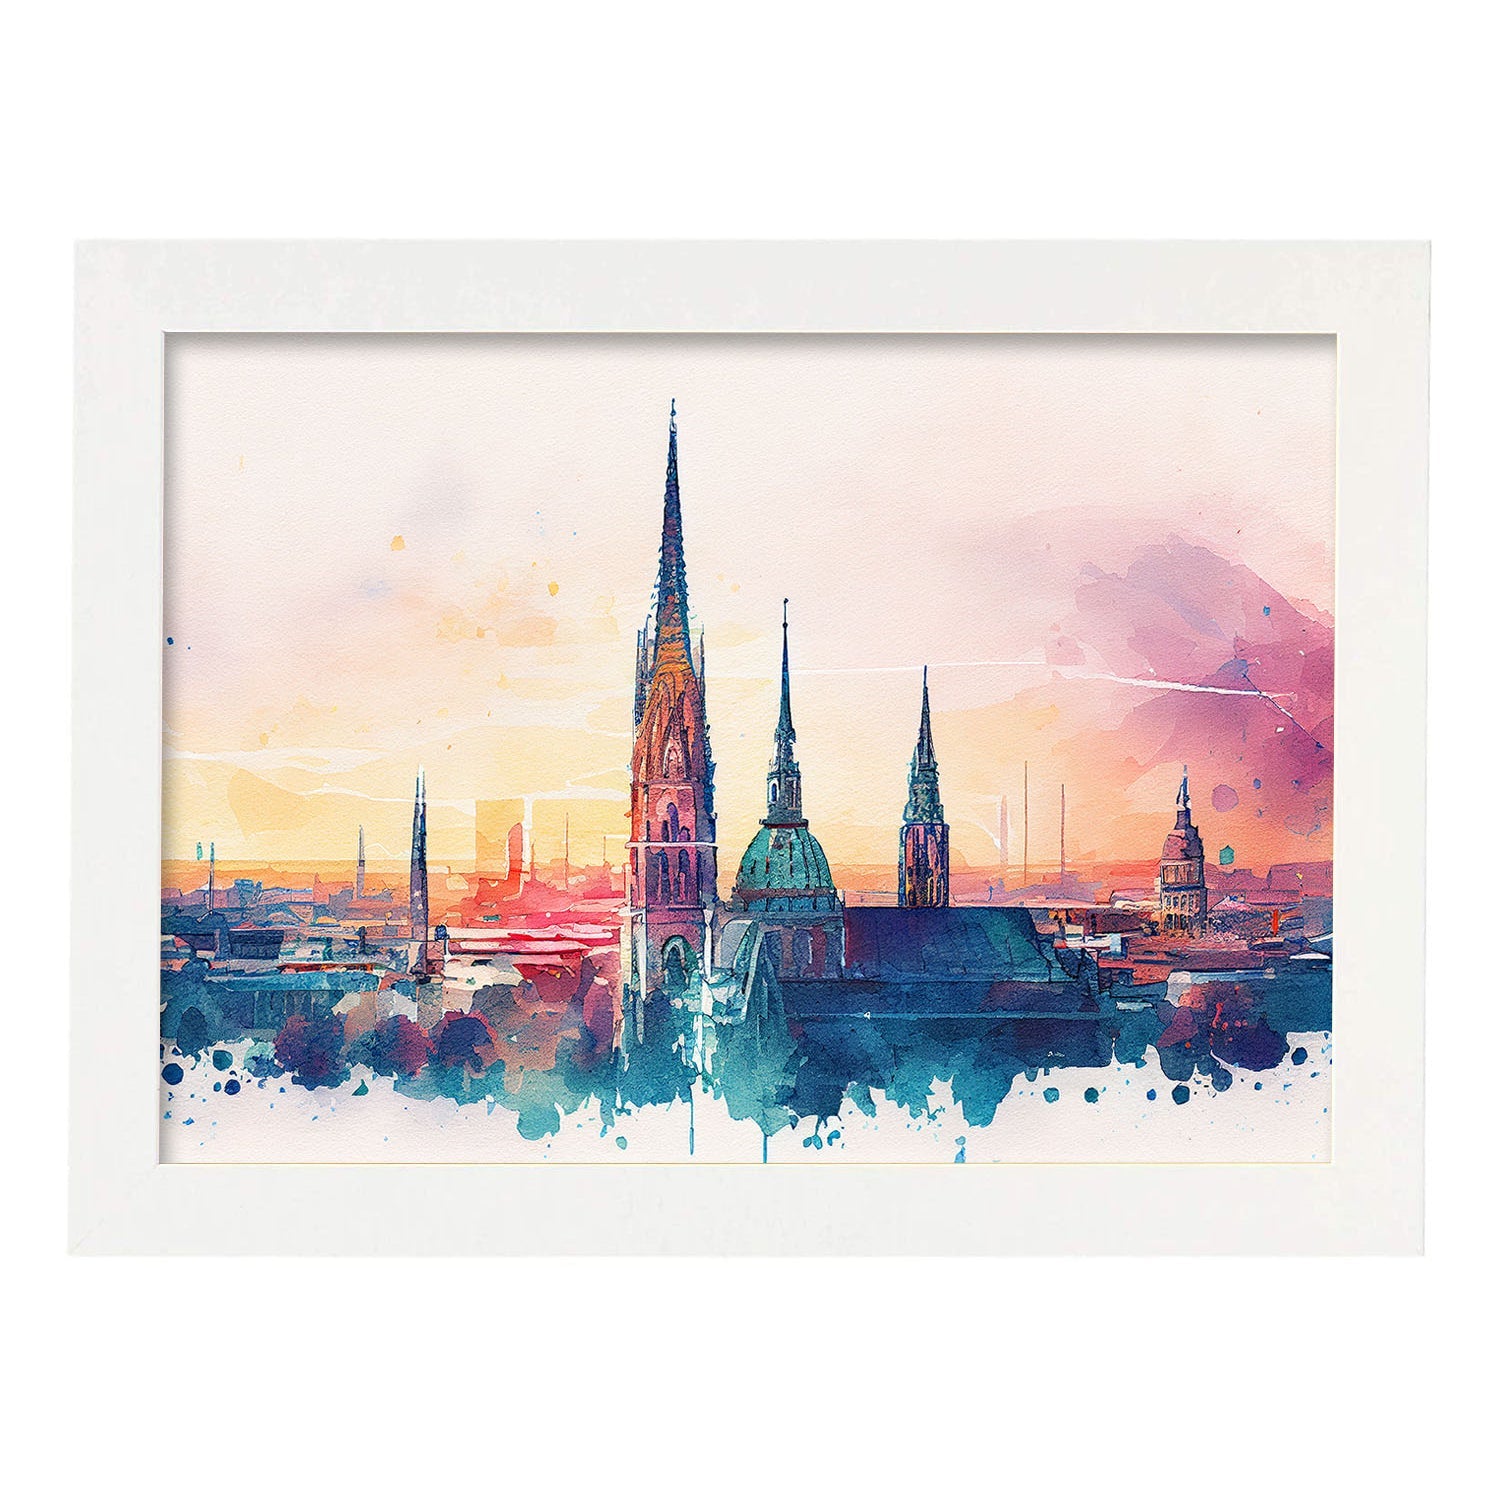 Nacnic watercolor of a skyline of the city of Vienna_4. Aesthetic Wall Art Prints for Bedroom or Living Room Design.-Artwork-Nacnic-A4-Marco Blanco-Nacnic Estudio SL